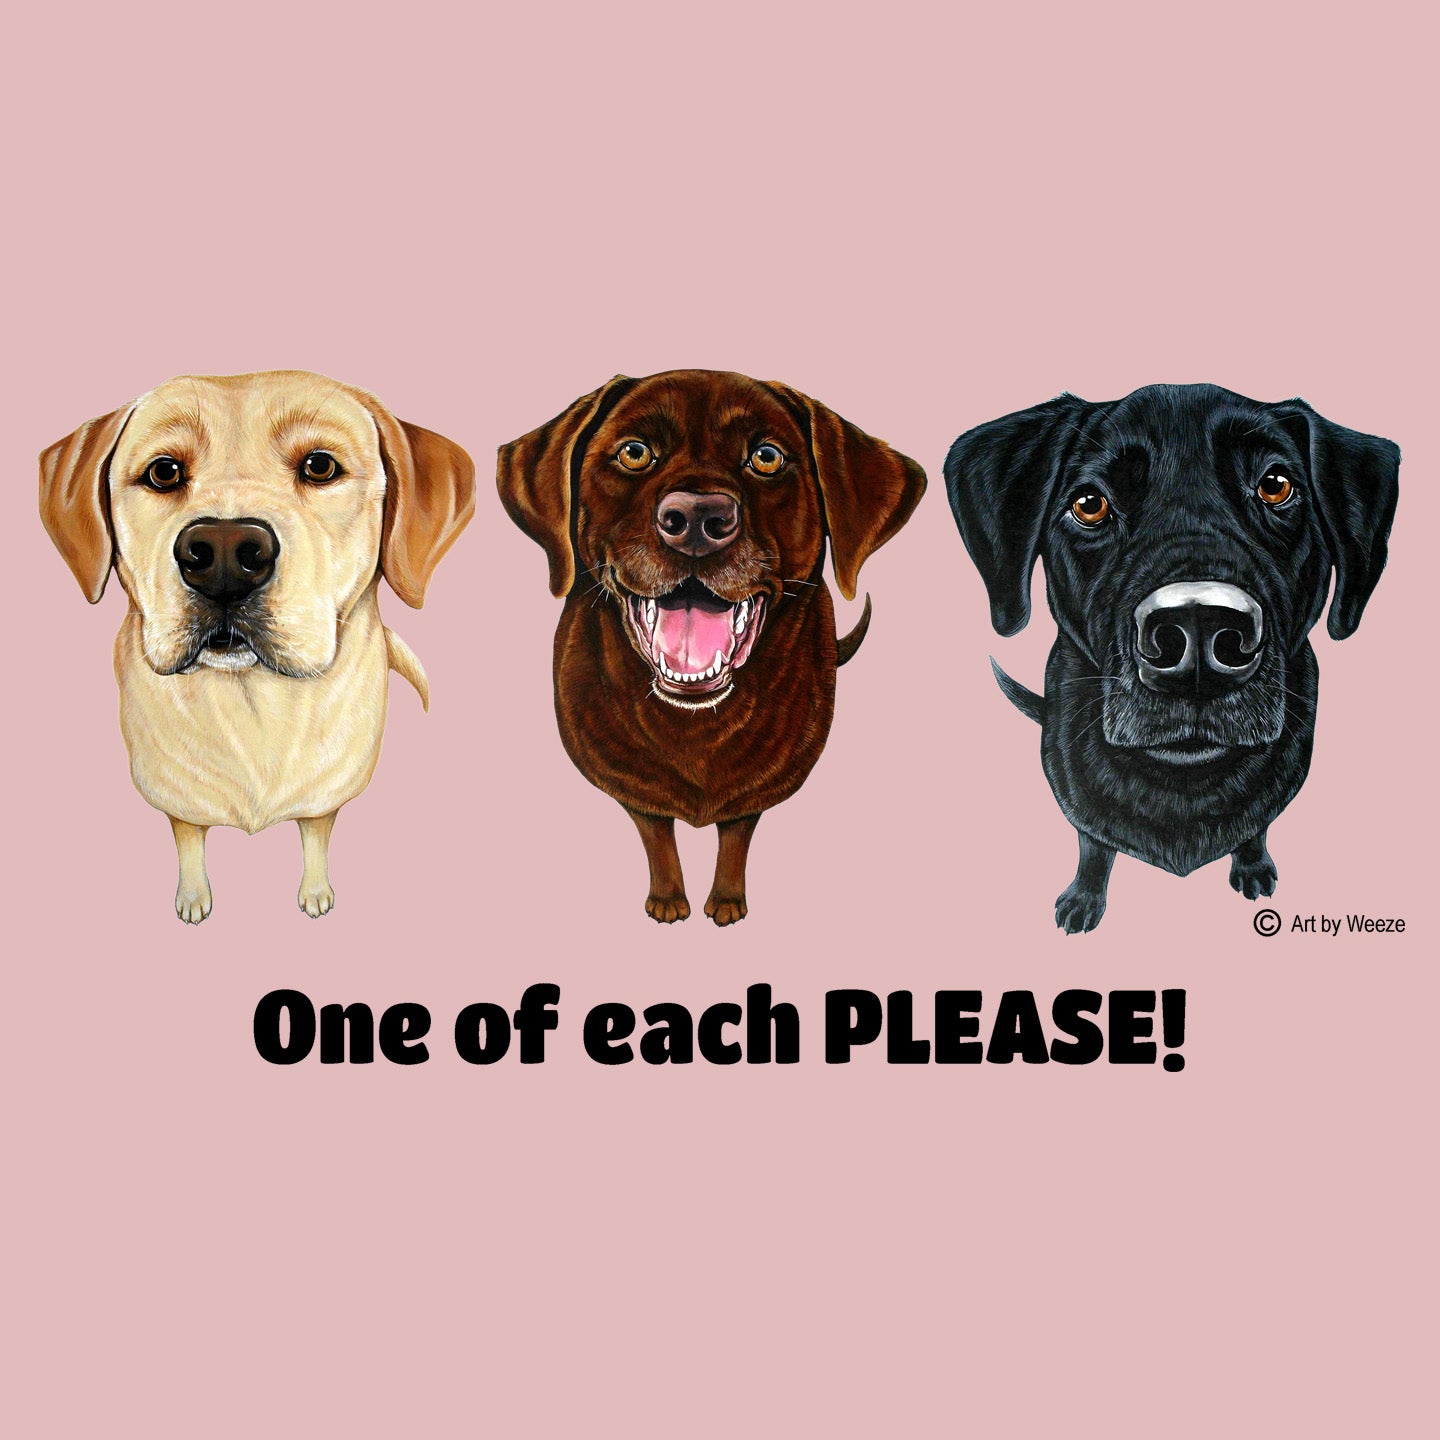 One of Each Labrador Please - Women's Fitted T-Shirt